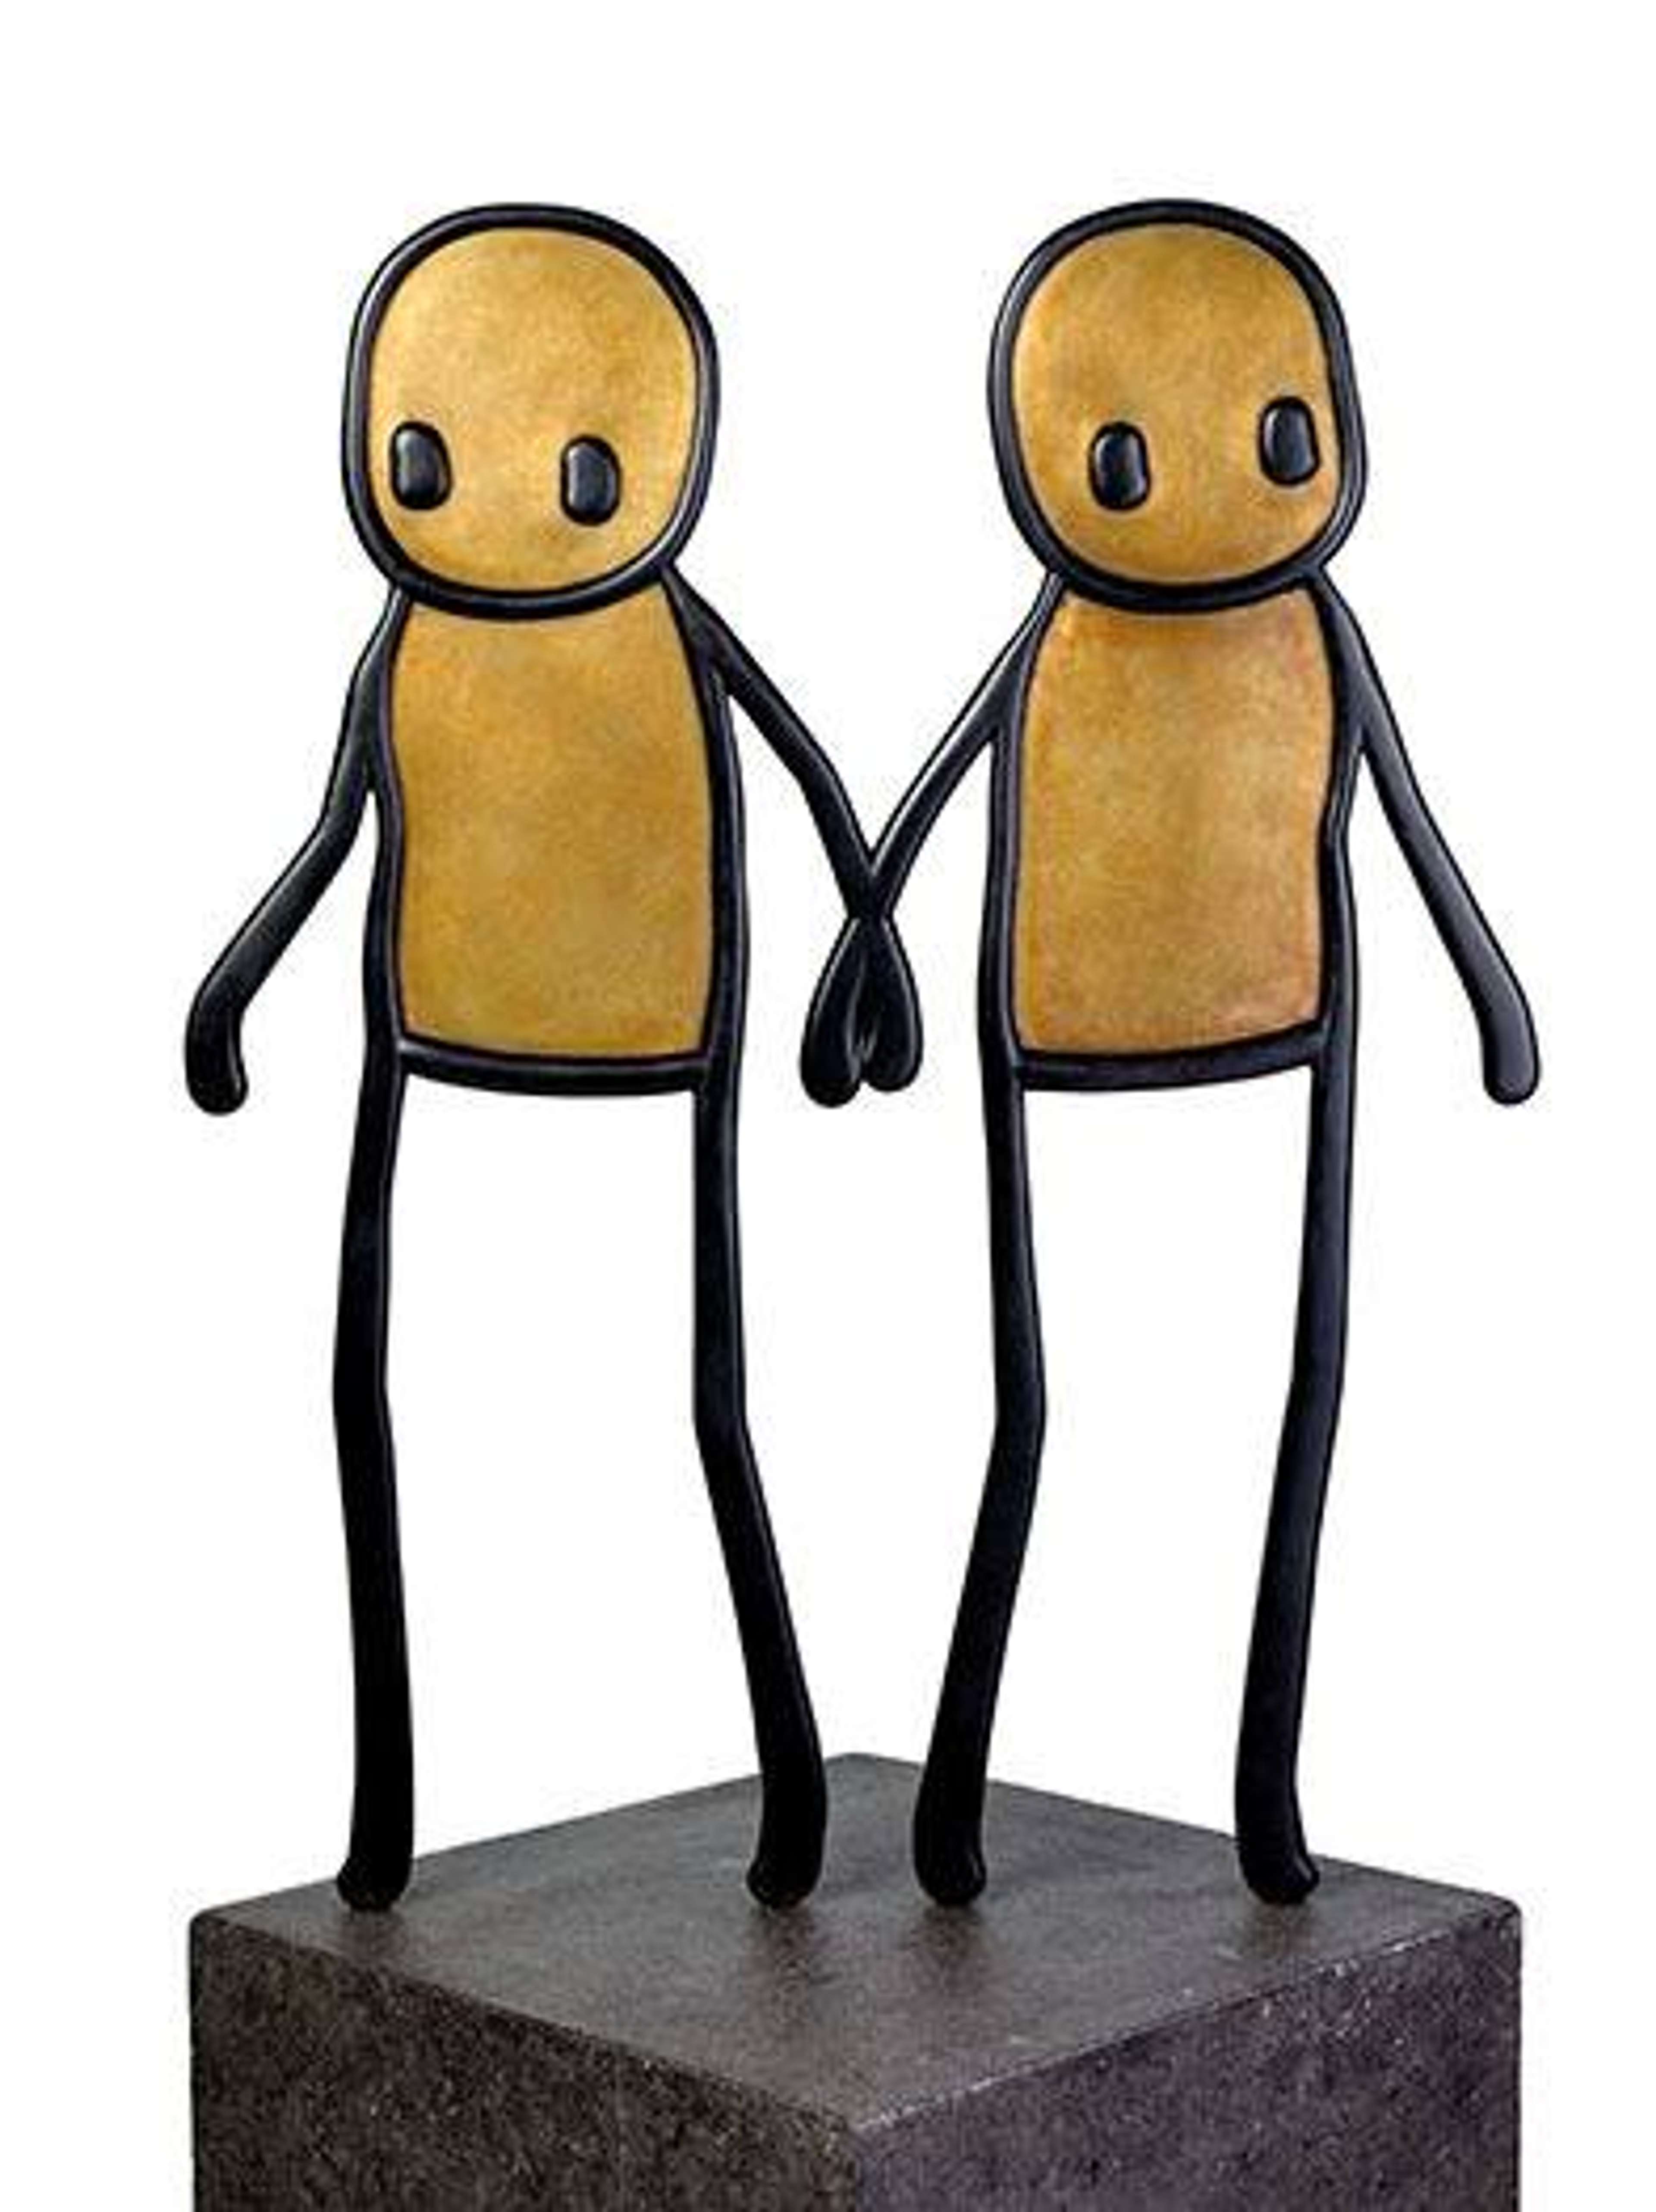 Holding Hands (Maquette) by Stik